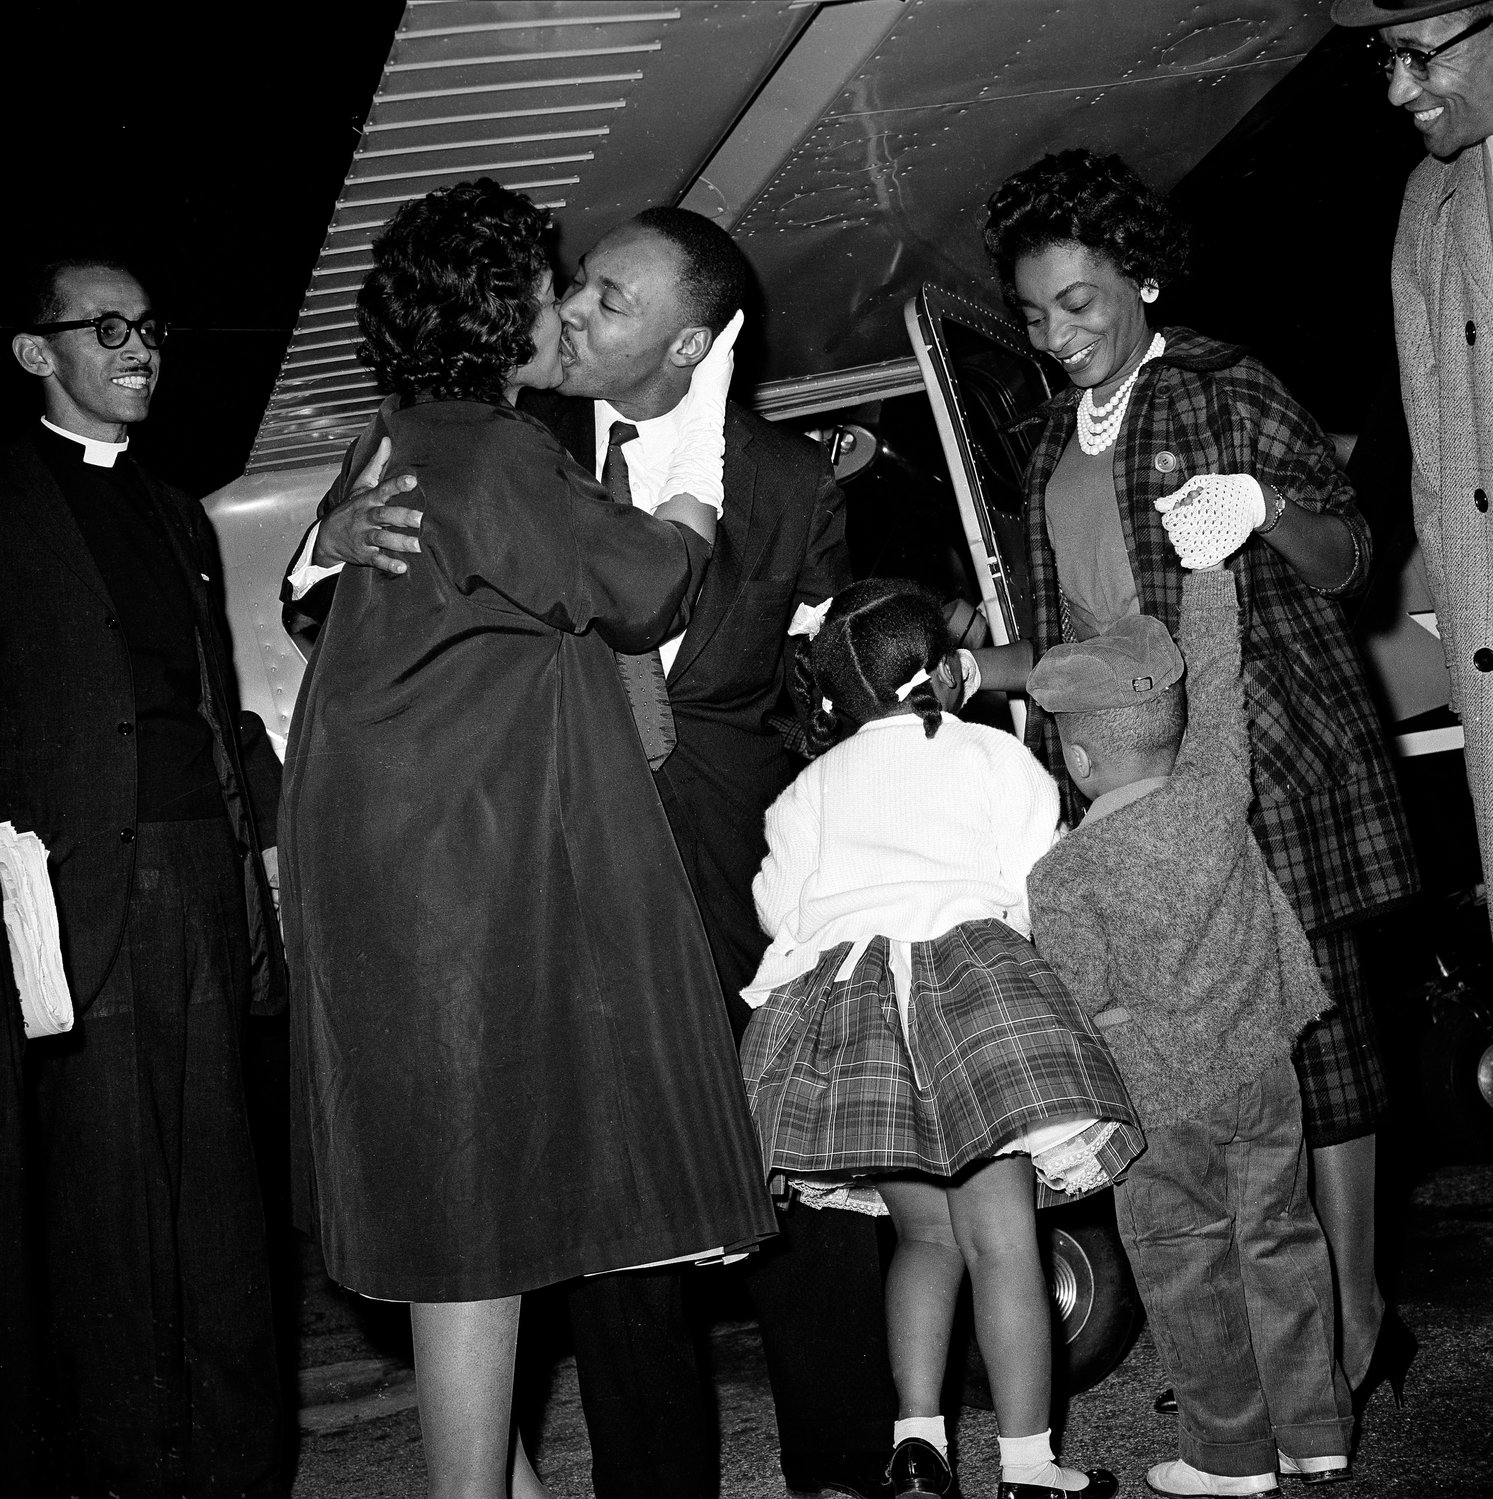 FILE - In this Oct. 27, 1960 file photo, Martin Luther King Jr. is given a kiss by his wife Coretta as he is welcomed back from Georgia's Reidsville State Prison by demonstrators and family gathered at the DeKalb Peachtree Airport. Following the publication of "An Appeal for Human Rights" on March 9, 1960, students at Atlanta's historically black colleges waged a nonviolent campaign of boycotts and sit-ins protesting segregation at restaurants, theaters, parks and government buildings. (AP Photo, File)